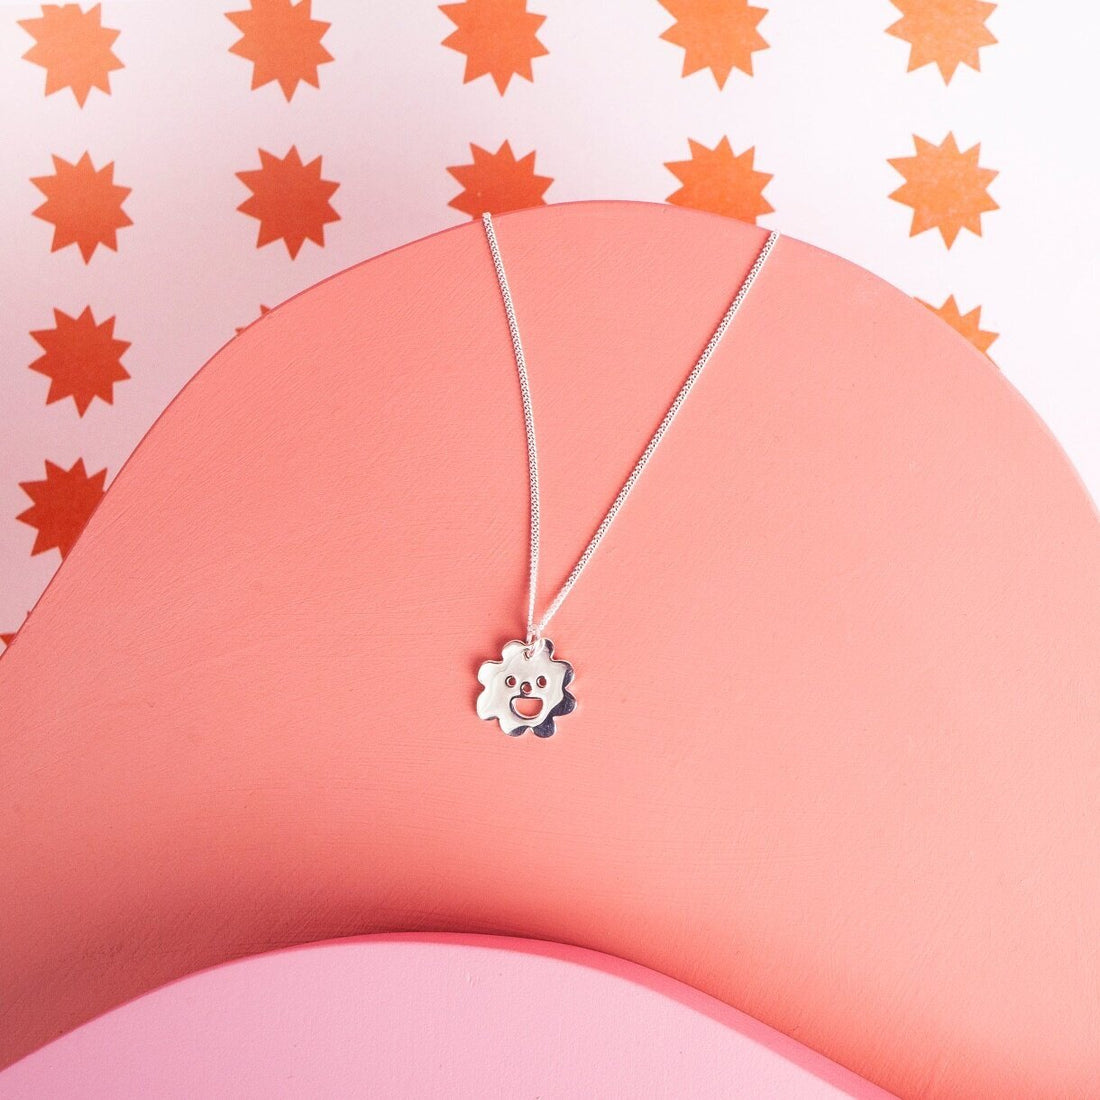  A silver pendant necklace with a flower shaped charm hanging on it. The charm has a smiley face cut out of it.